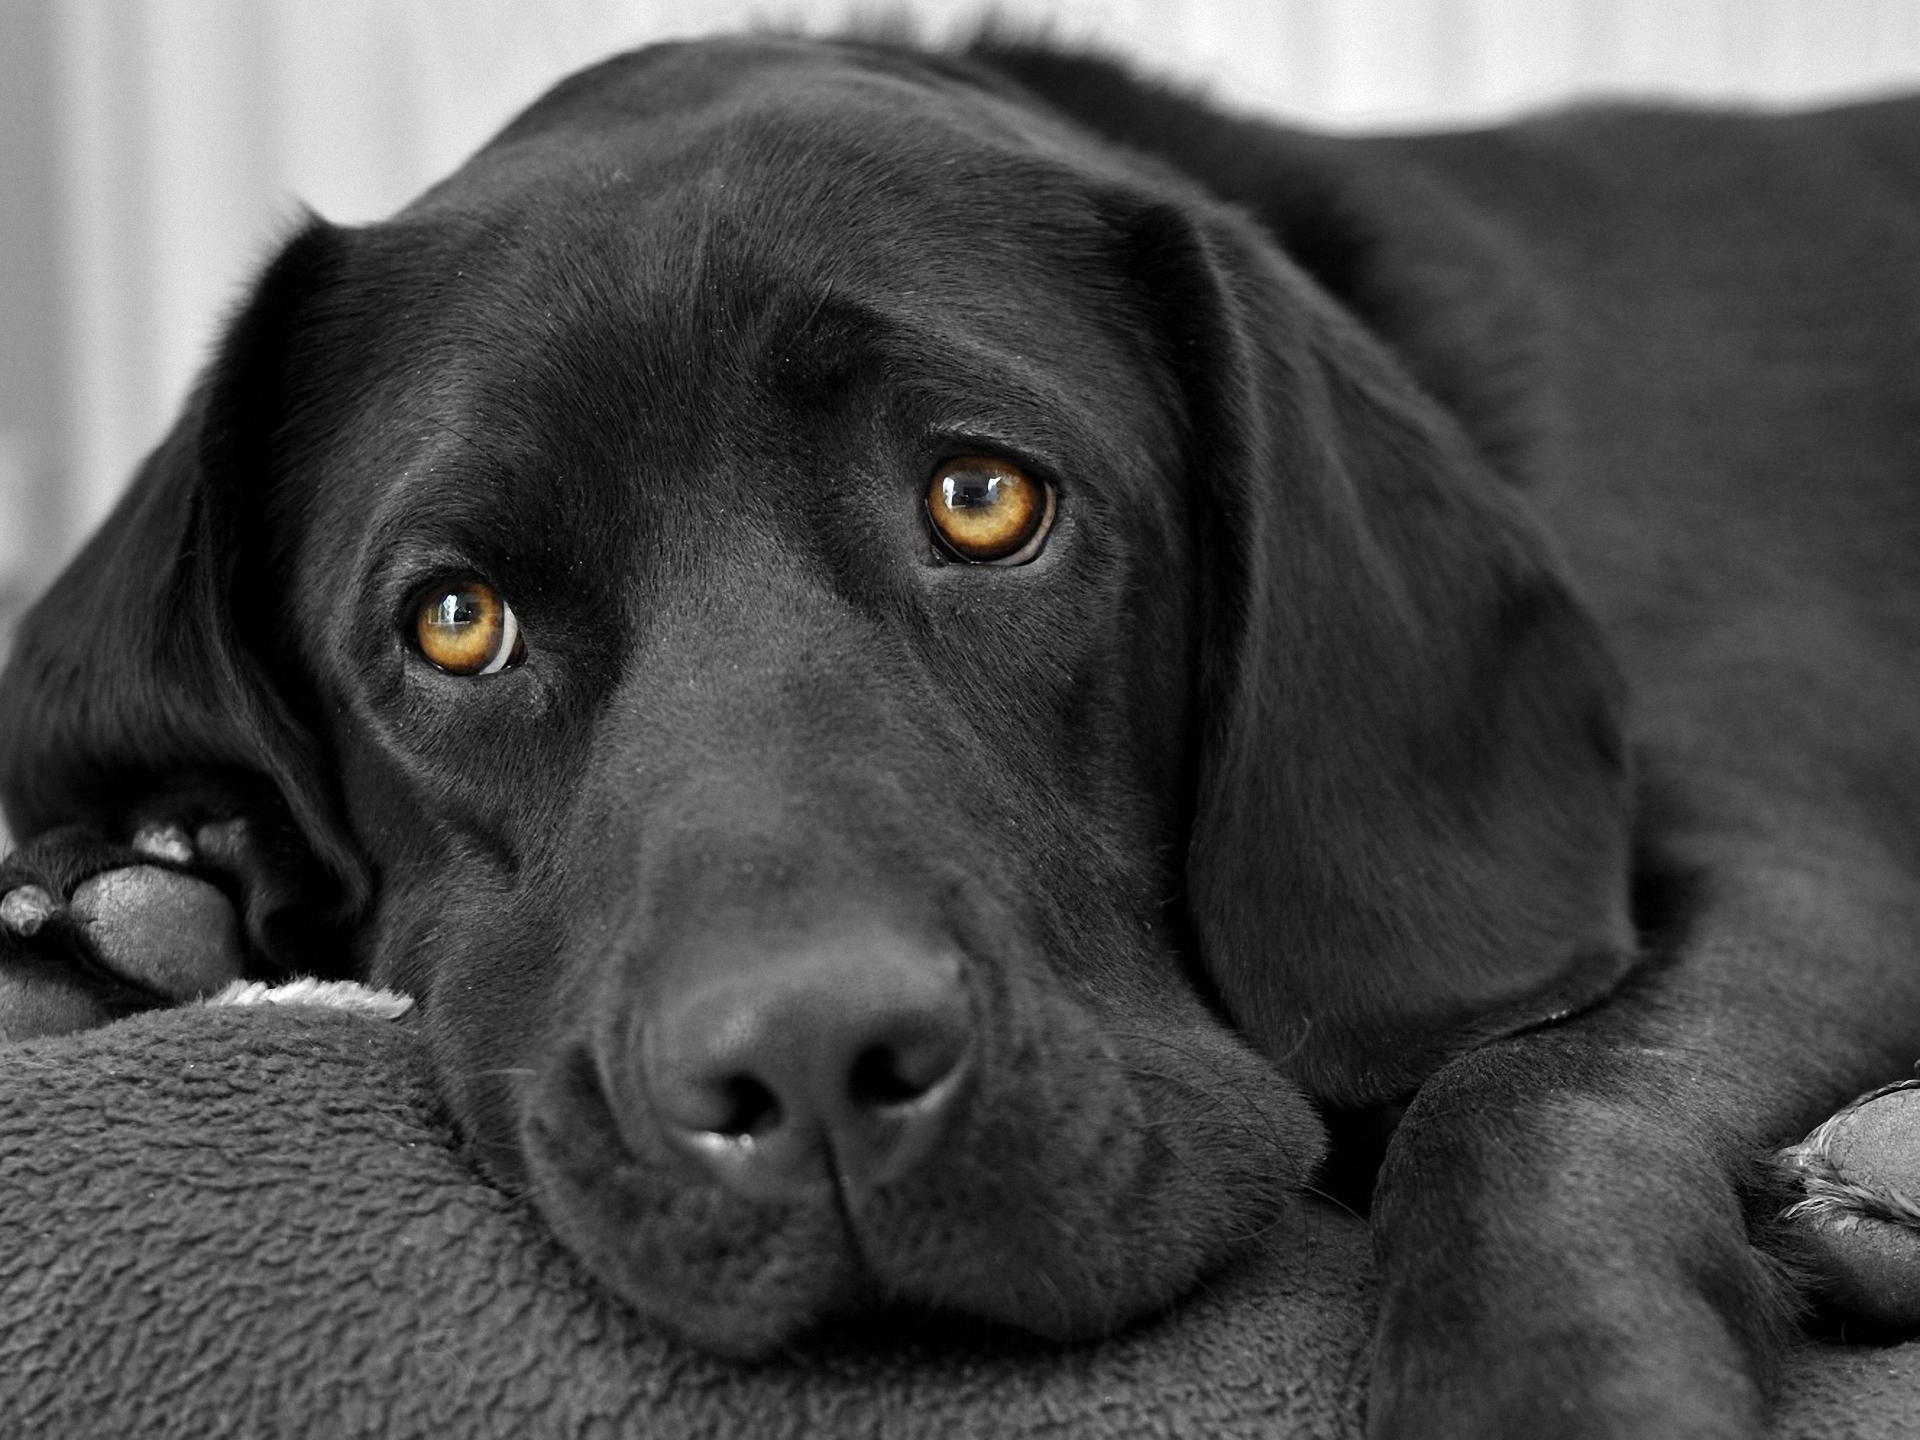 Black Dog Wallpaper High Quality Resolution » Earthly Wallpaper 1080p